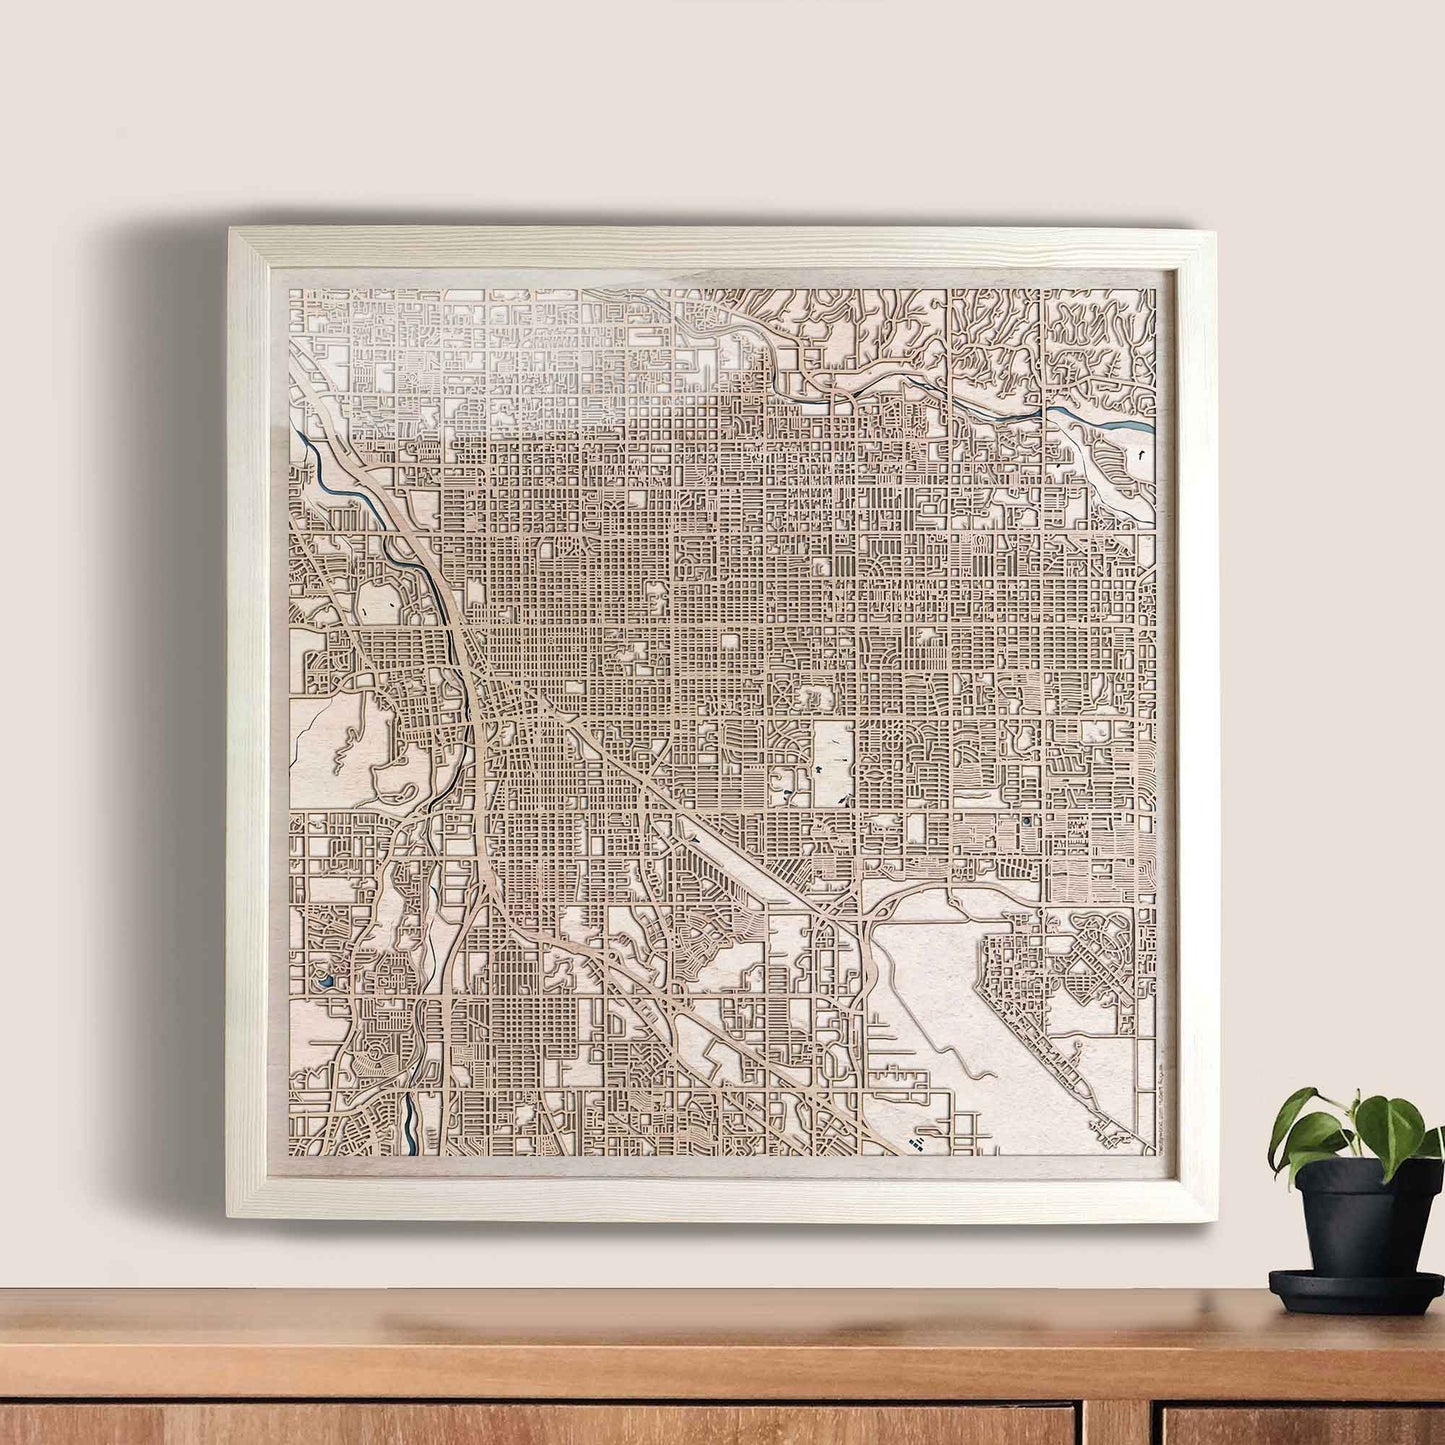 Tucson Wooden Map by CityWood - Custom Wood Map Art - Unique Laser Cut Engraved - Anniversary Gift